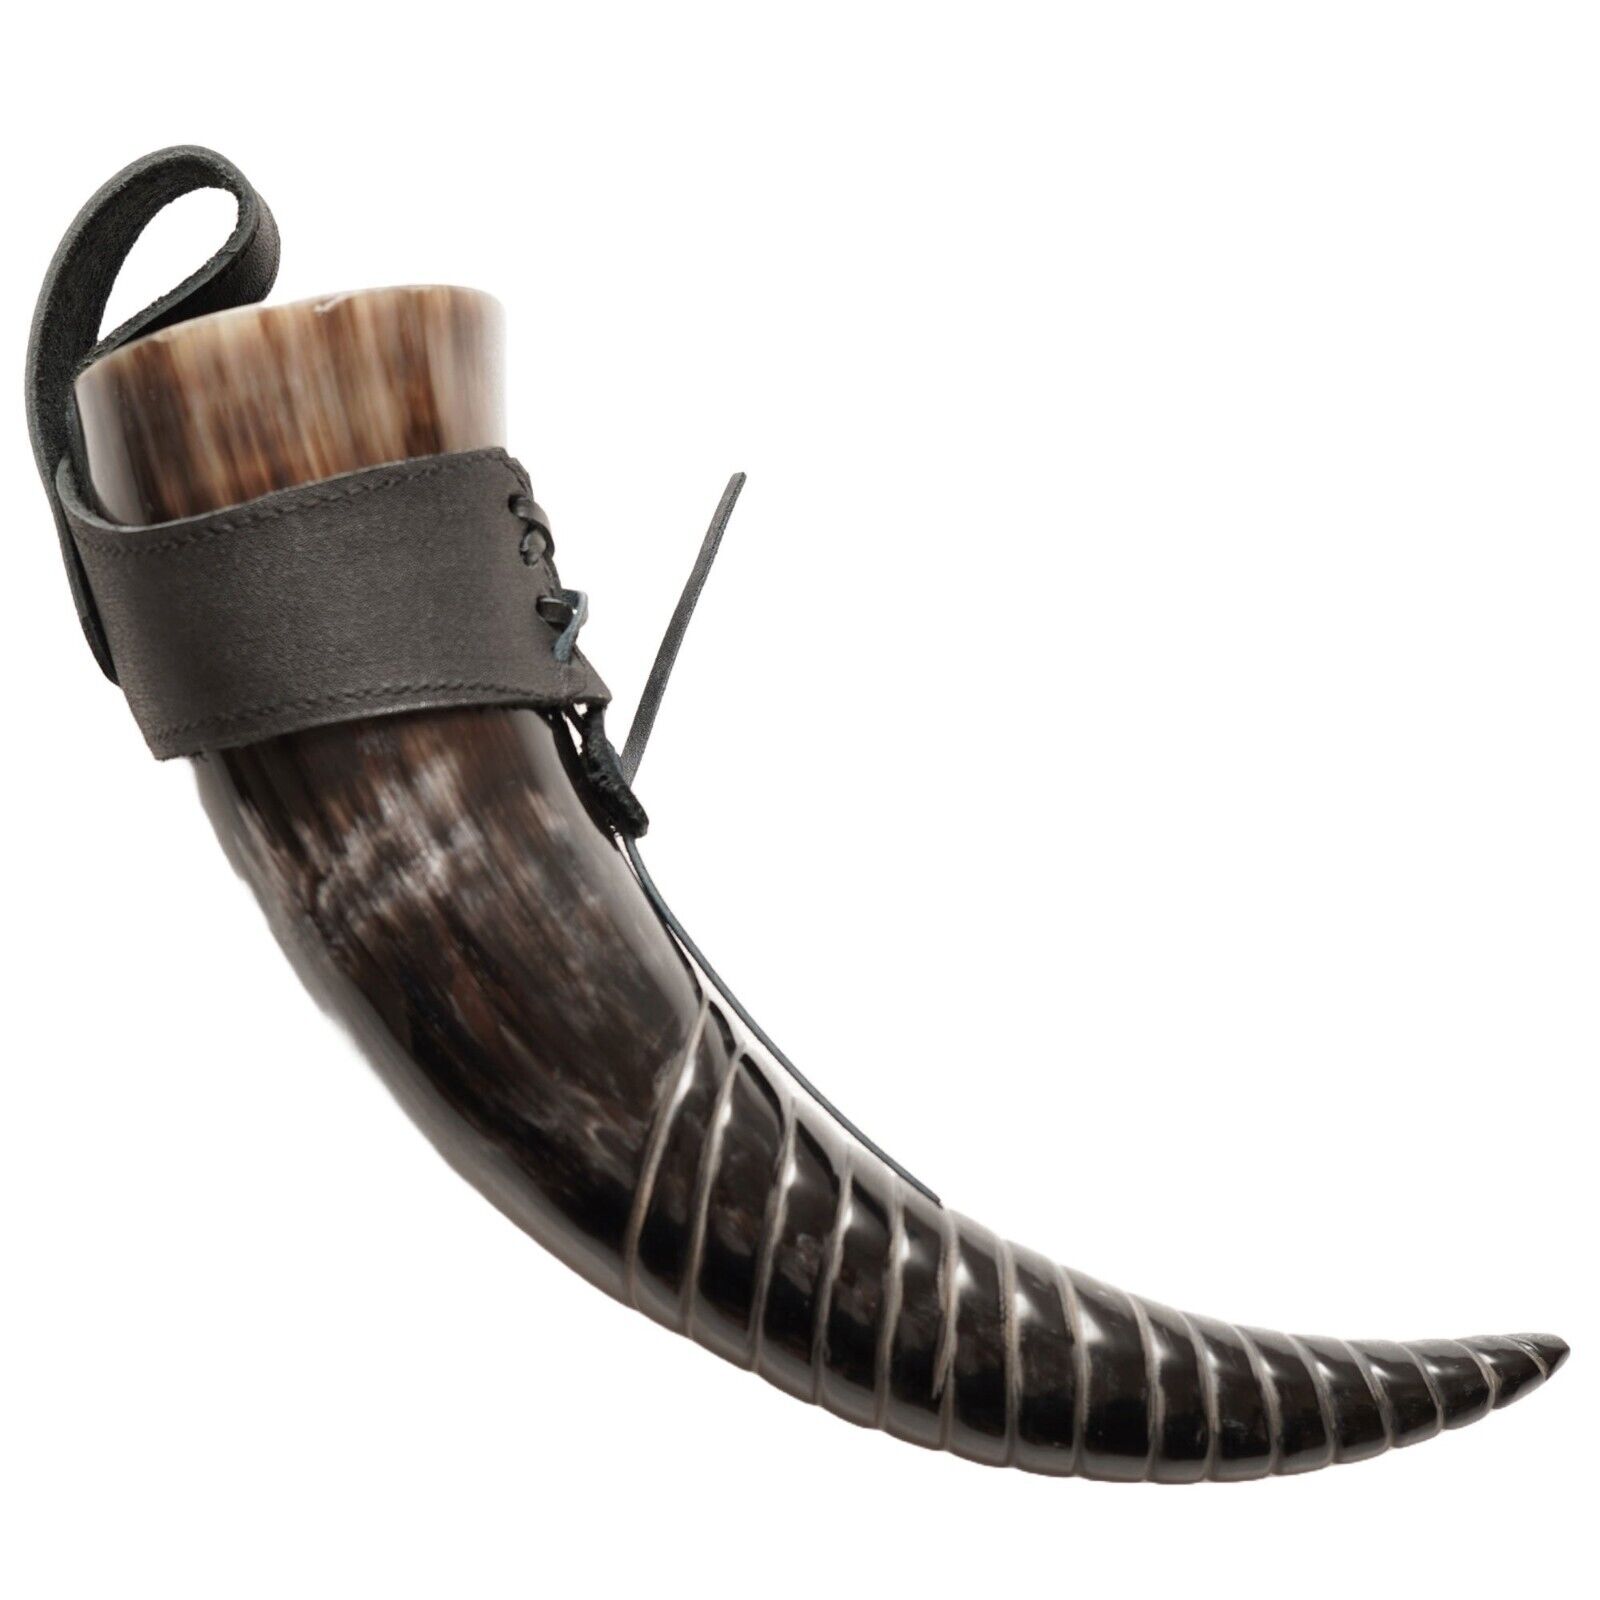 Medieval Drinking Horn with Black Leather Holster